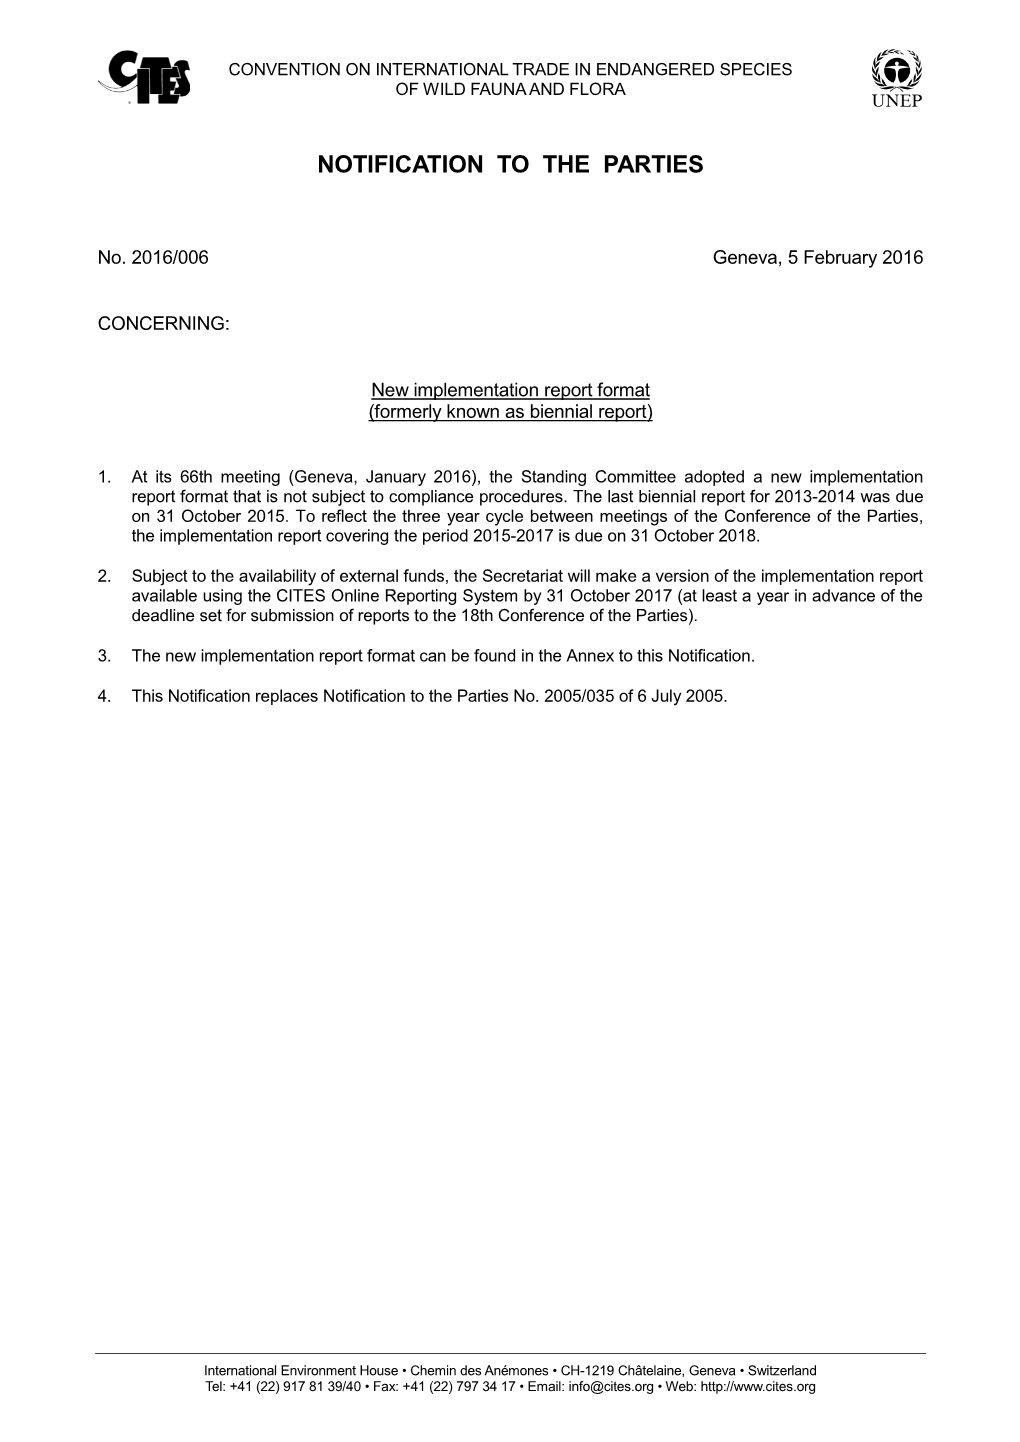 Notification to the Parties No. 2016/006